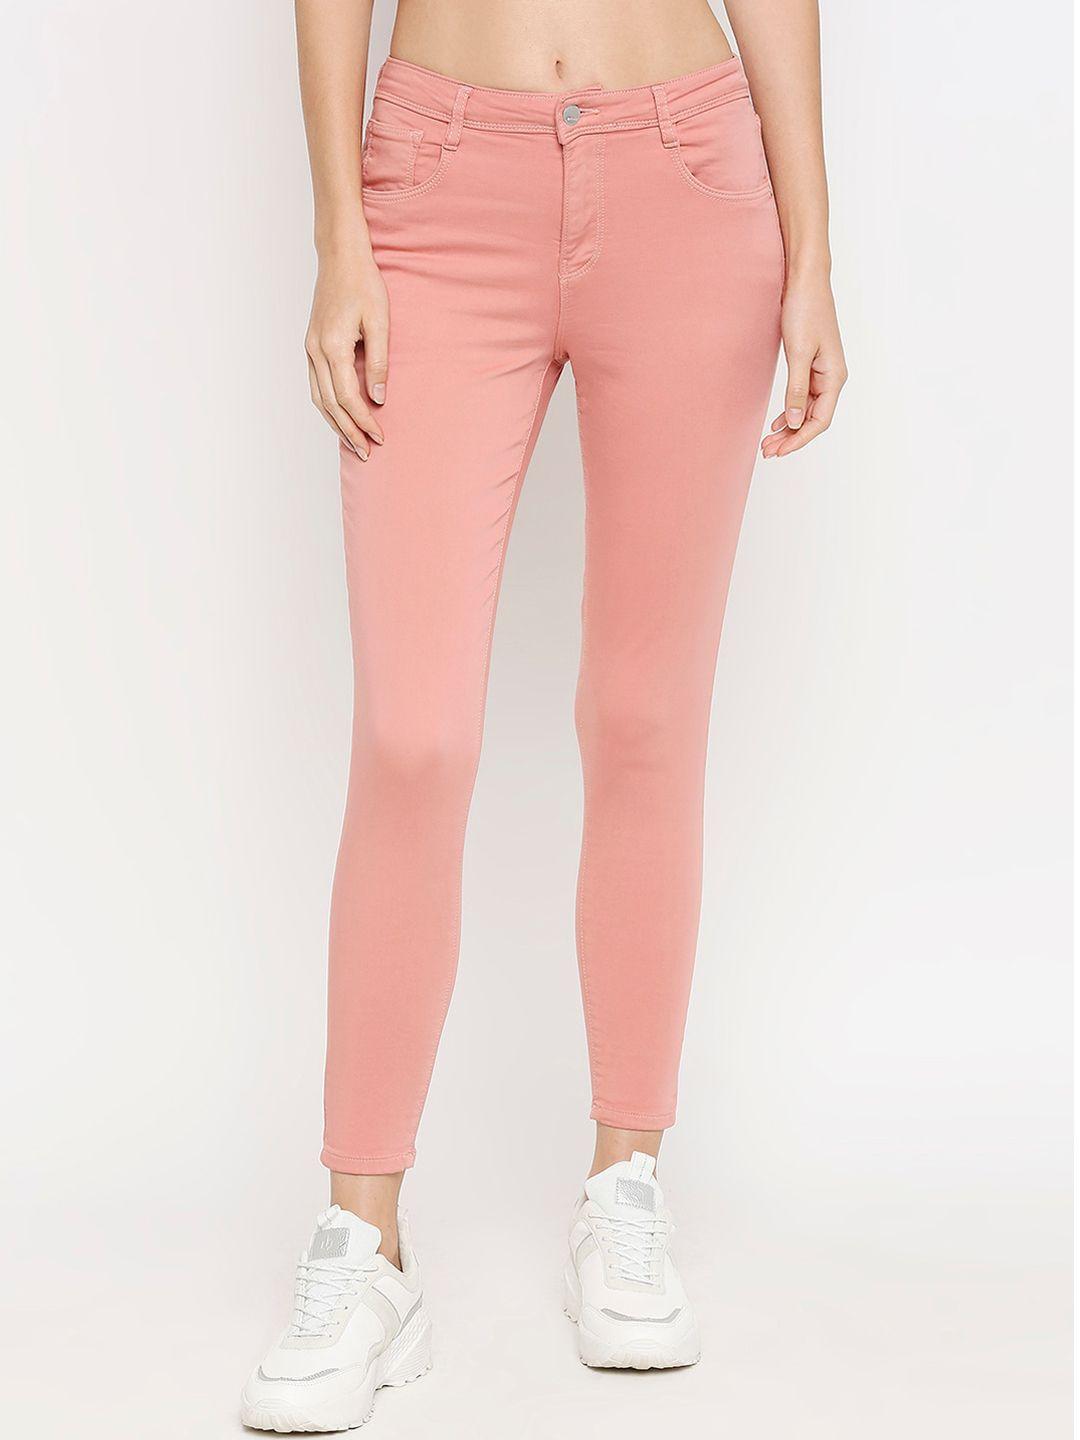 kraus jeans women pink skinny fit high-rise jeans